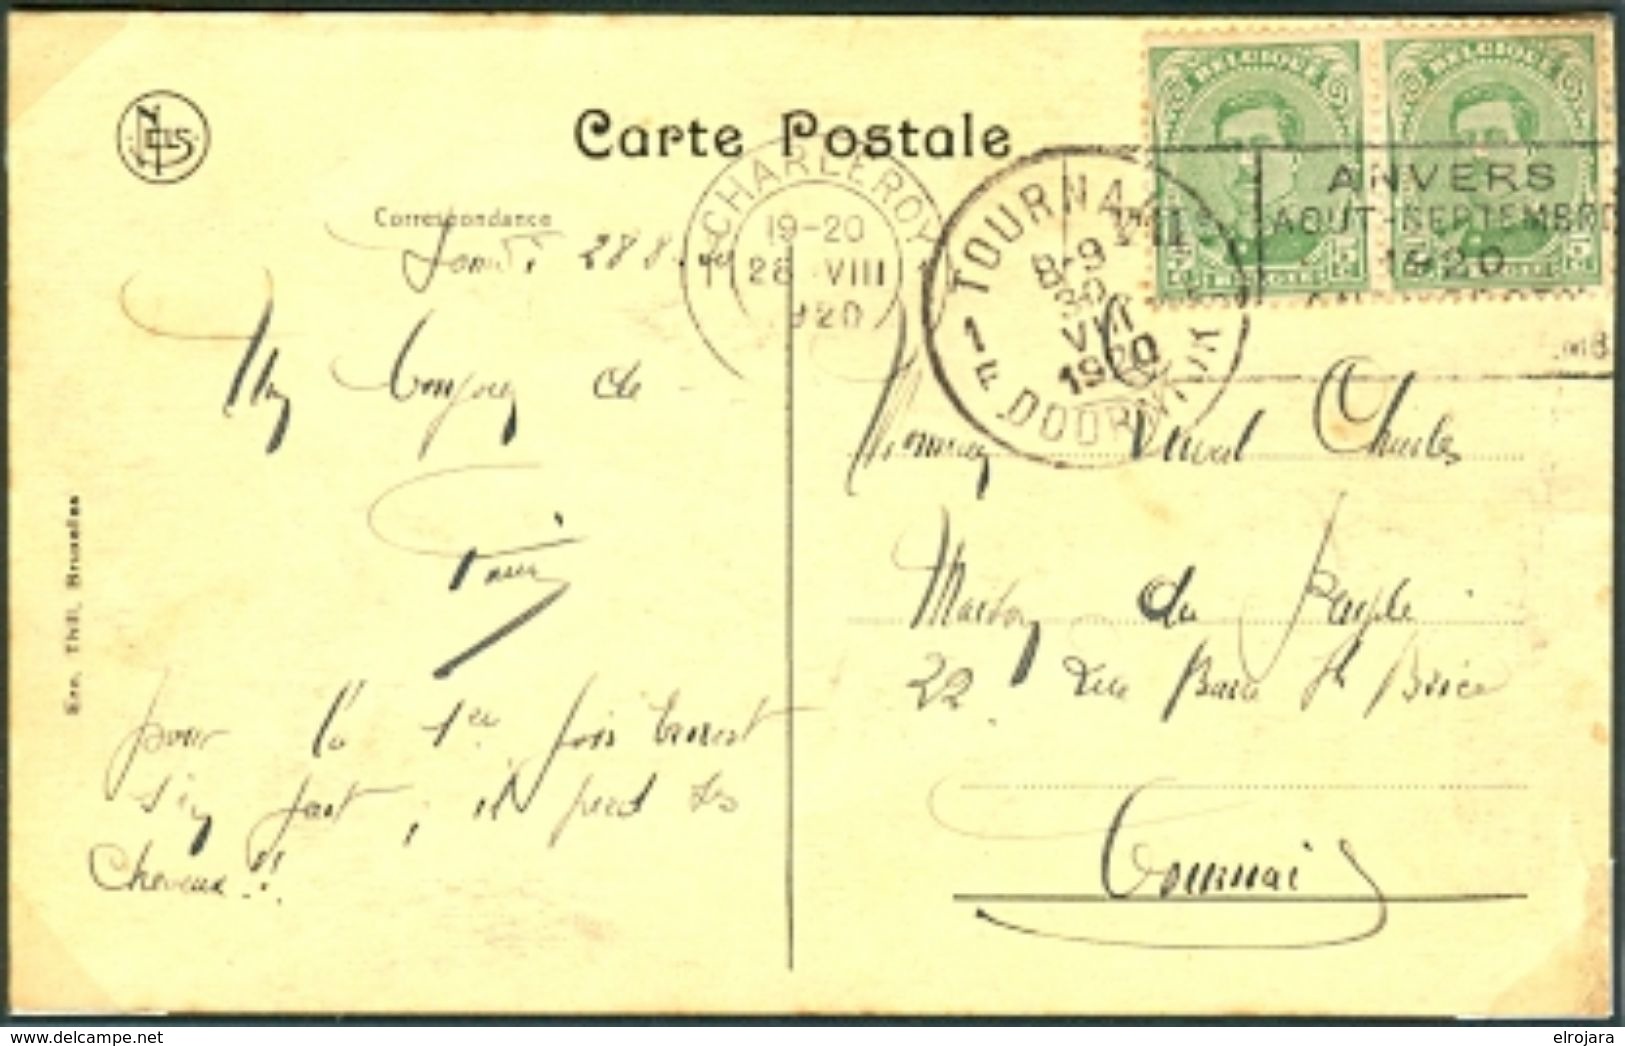 BELGIUM Postcard With Olympic Machine Cancel Charleroy 1 Dated 28-VIII 1920 Waterpolo/Soccer Day - Sommer 1920: Antwerpen